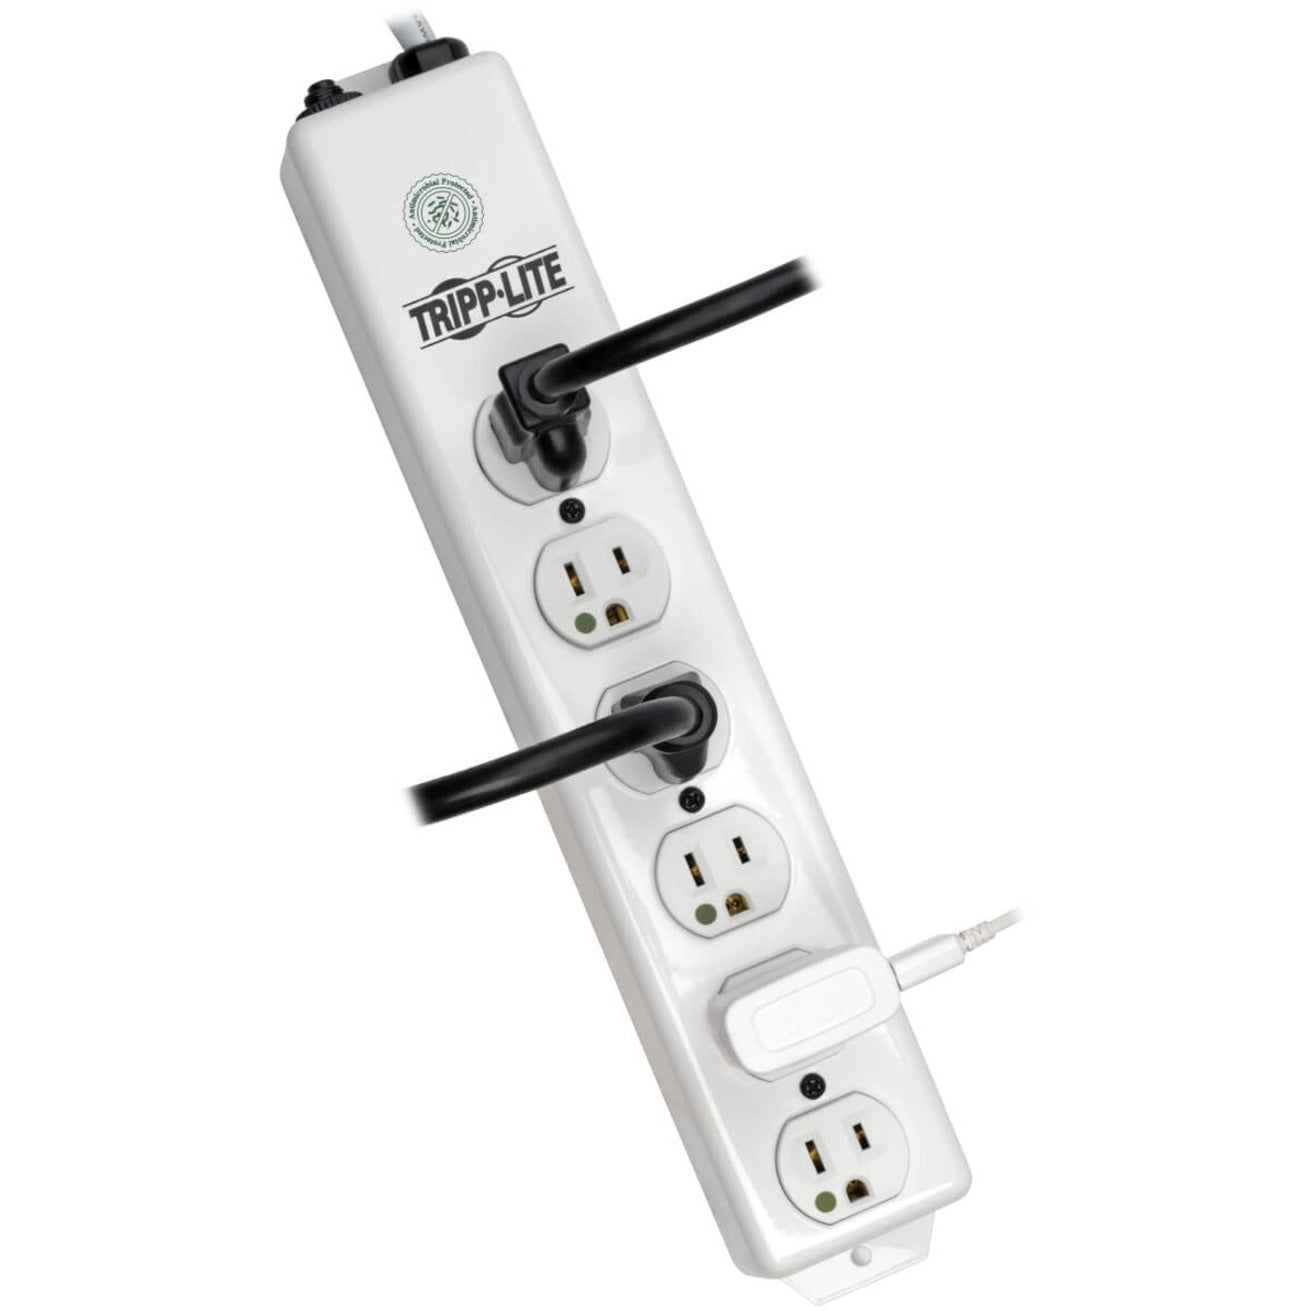 Tripp Lite PS-602-HG Power Strip, 6 Outlets, 120V AC, 15A, RoHS Certified